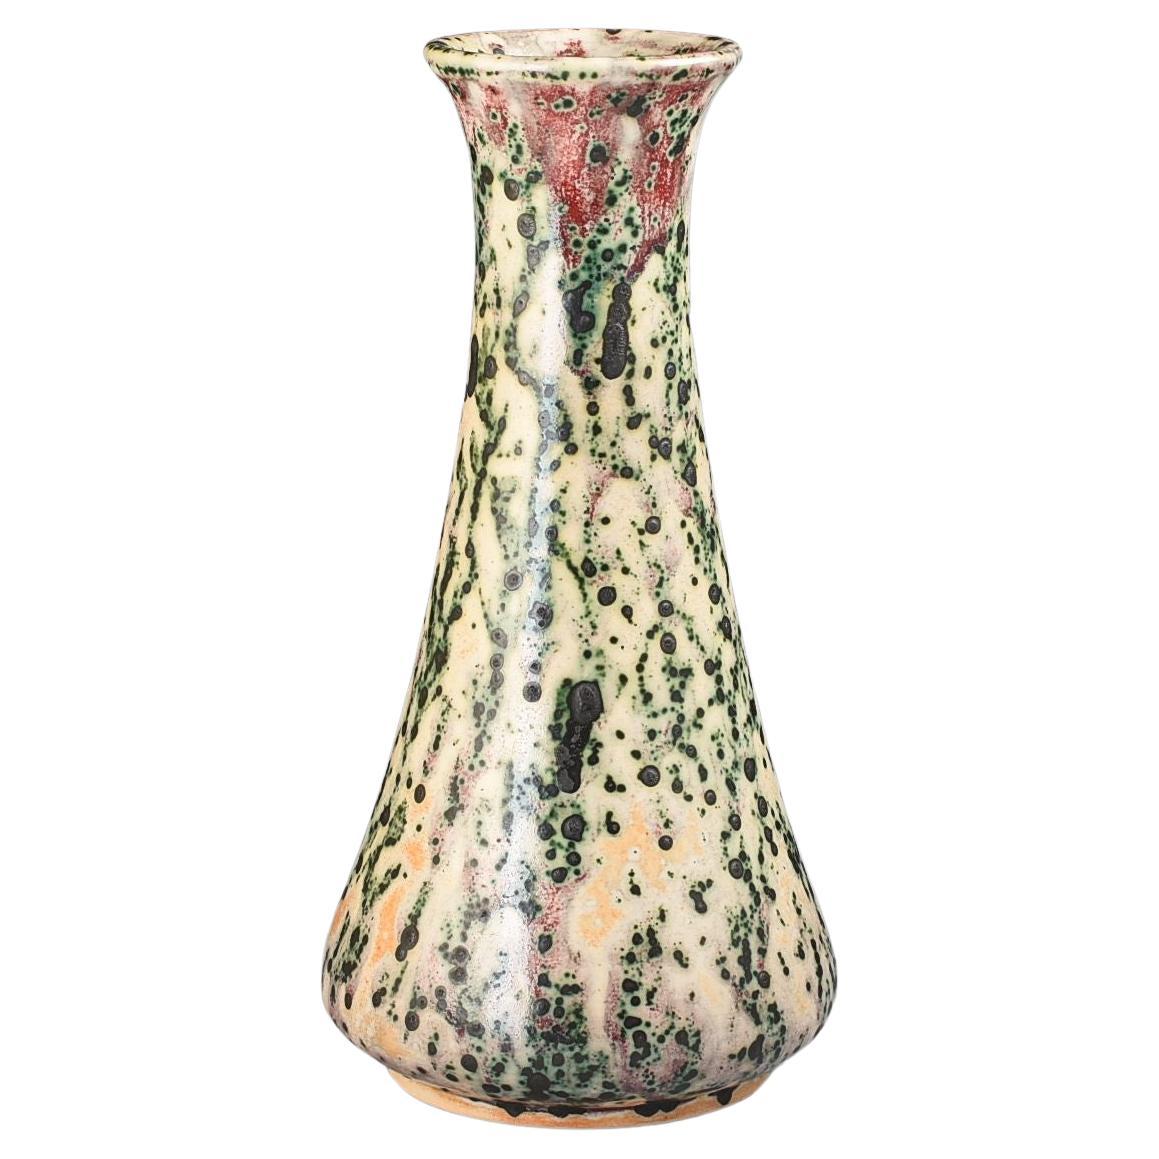 Ruskin pottery - HIGH FIRED VASE C.1933 For Sale